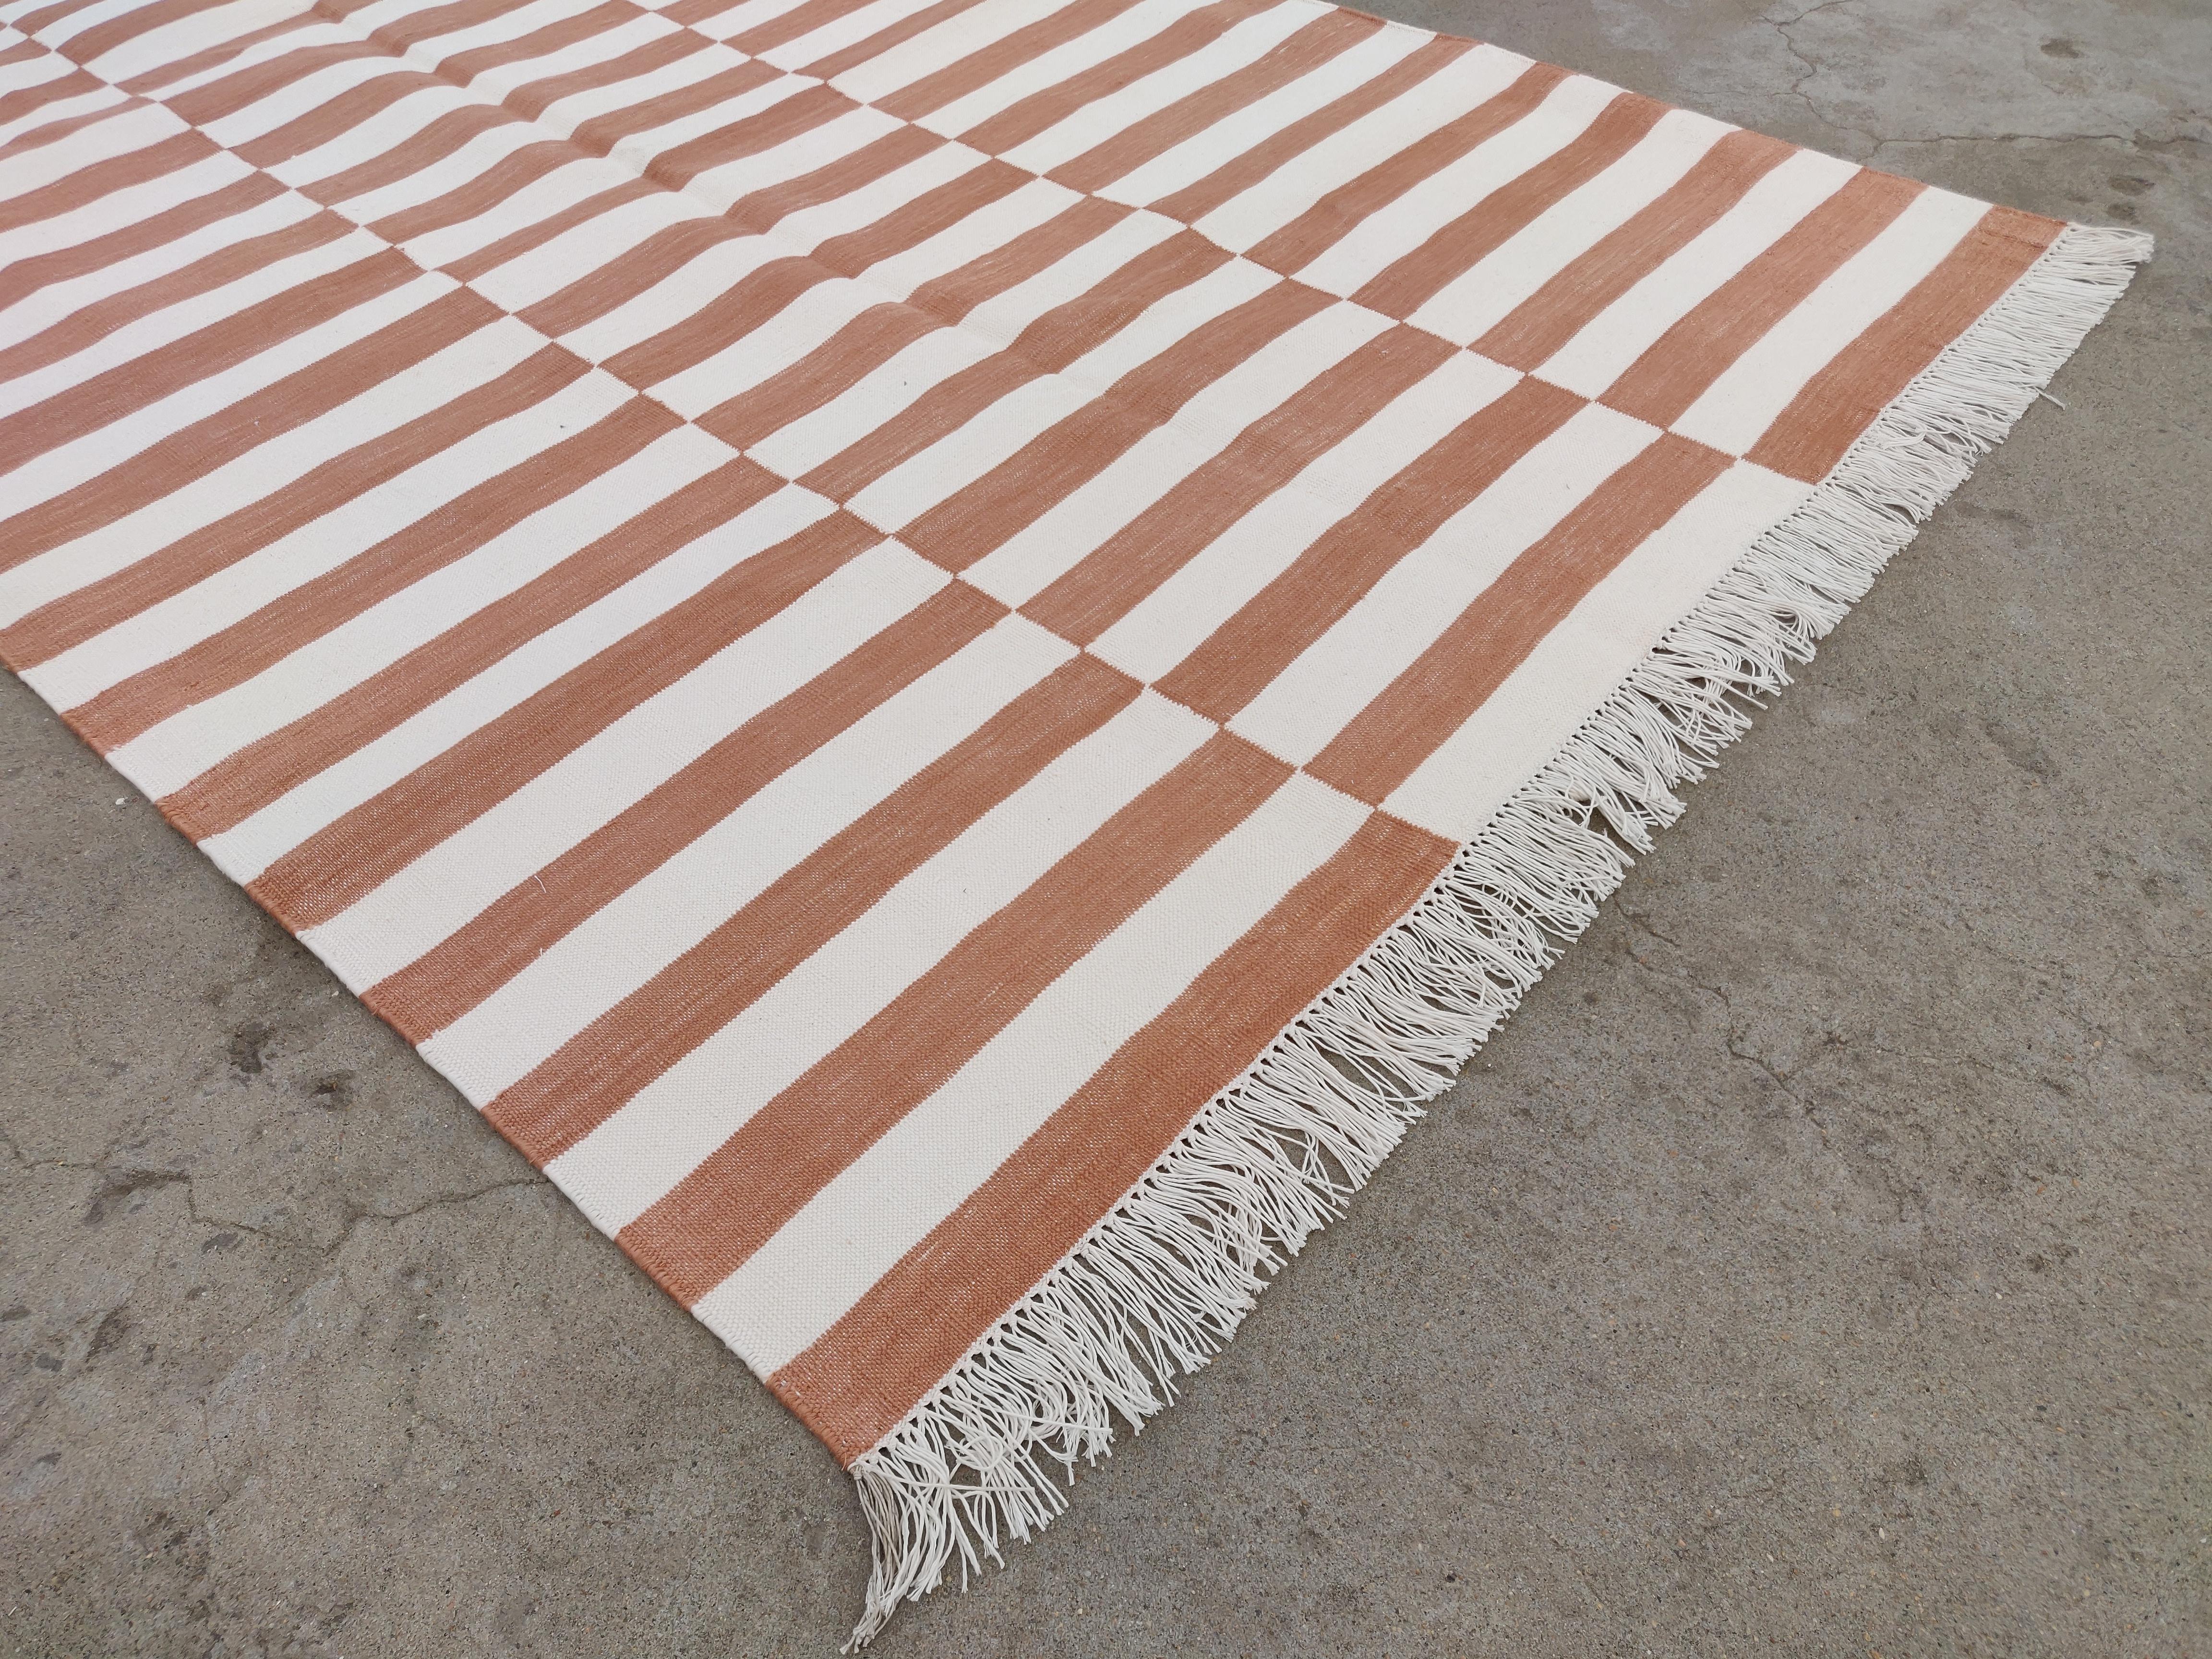 Hand-Woven Handmade Cotton Area Flat Weave Rug, 4x6 Tan And White Striped Indian Dhurrie For Sale